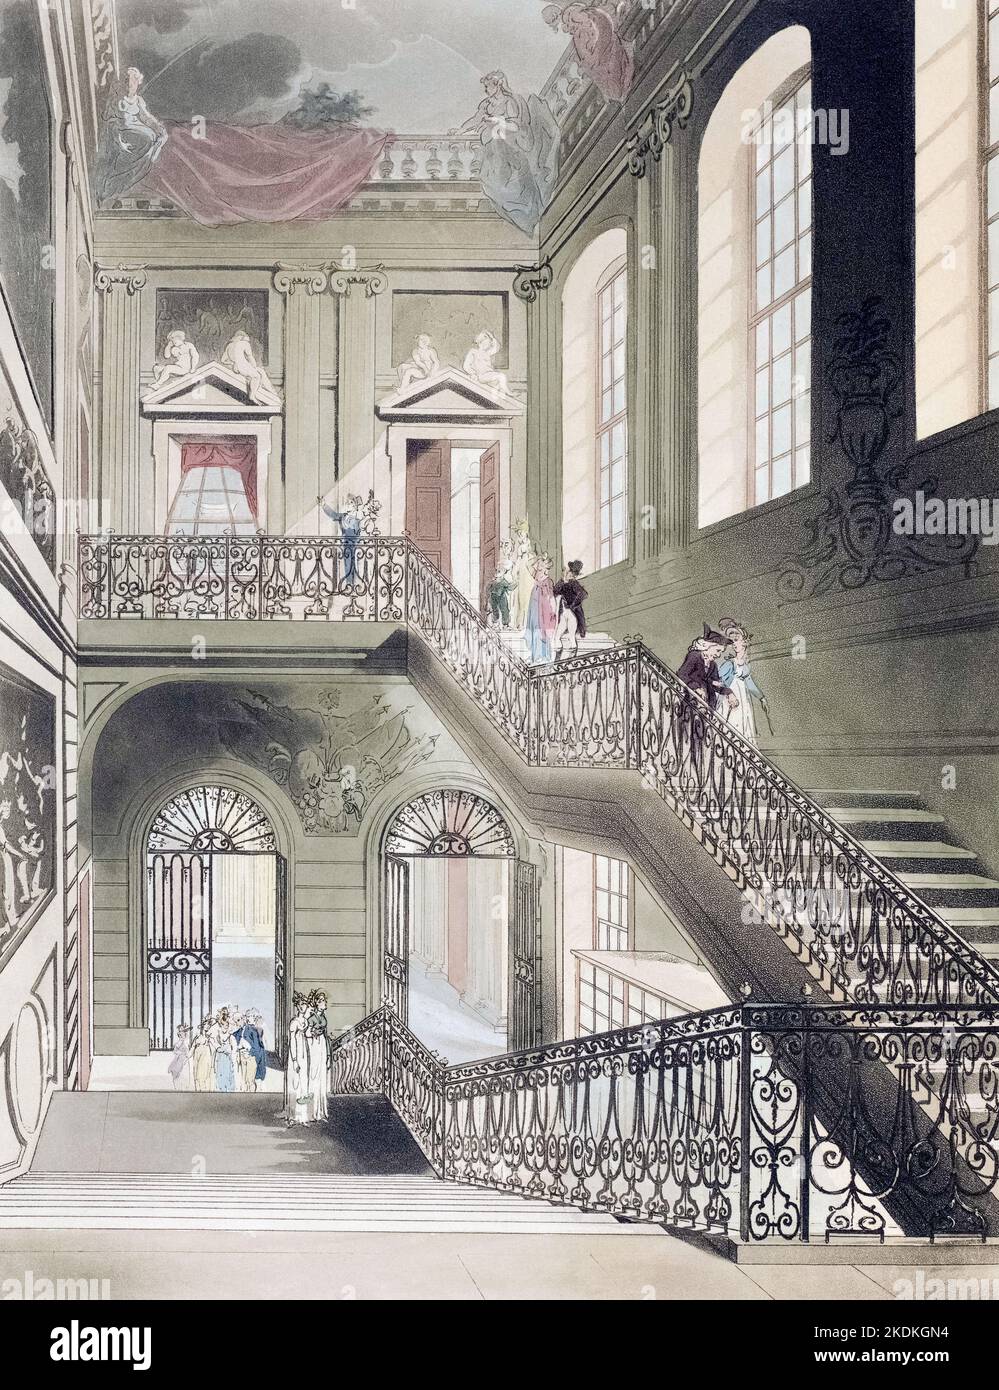 The hall and stair case, British Museum.  Circa 1808.  After a work by August Pugin and Thomas Rowlandson in the Microcosm of London, published in three volumes between 1808 and 1810 by Rudolph Ackermann.   Pugin was the artist responsible for the architectural elements in the Microcosm pictures; Thomas Rowlandson was hired to add the lively human figures. Stock Photo